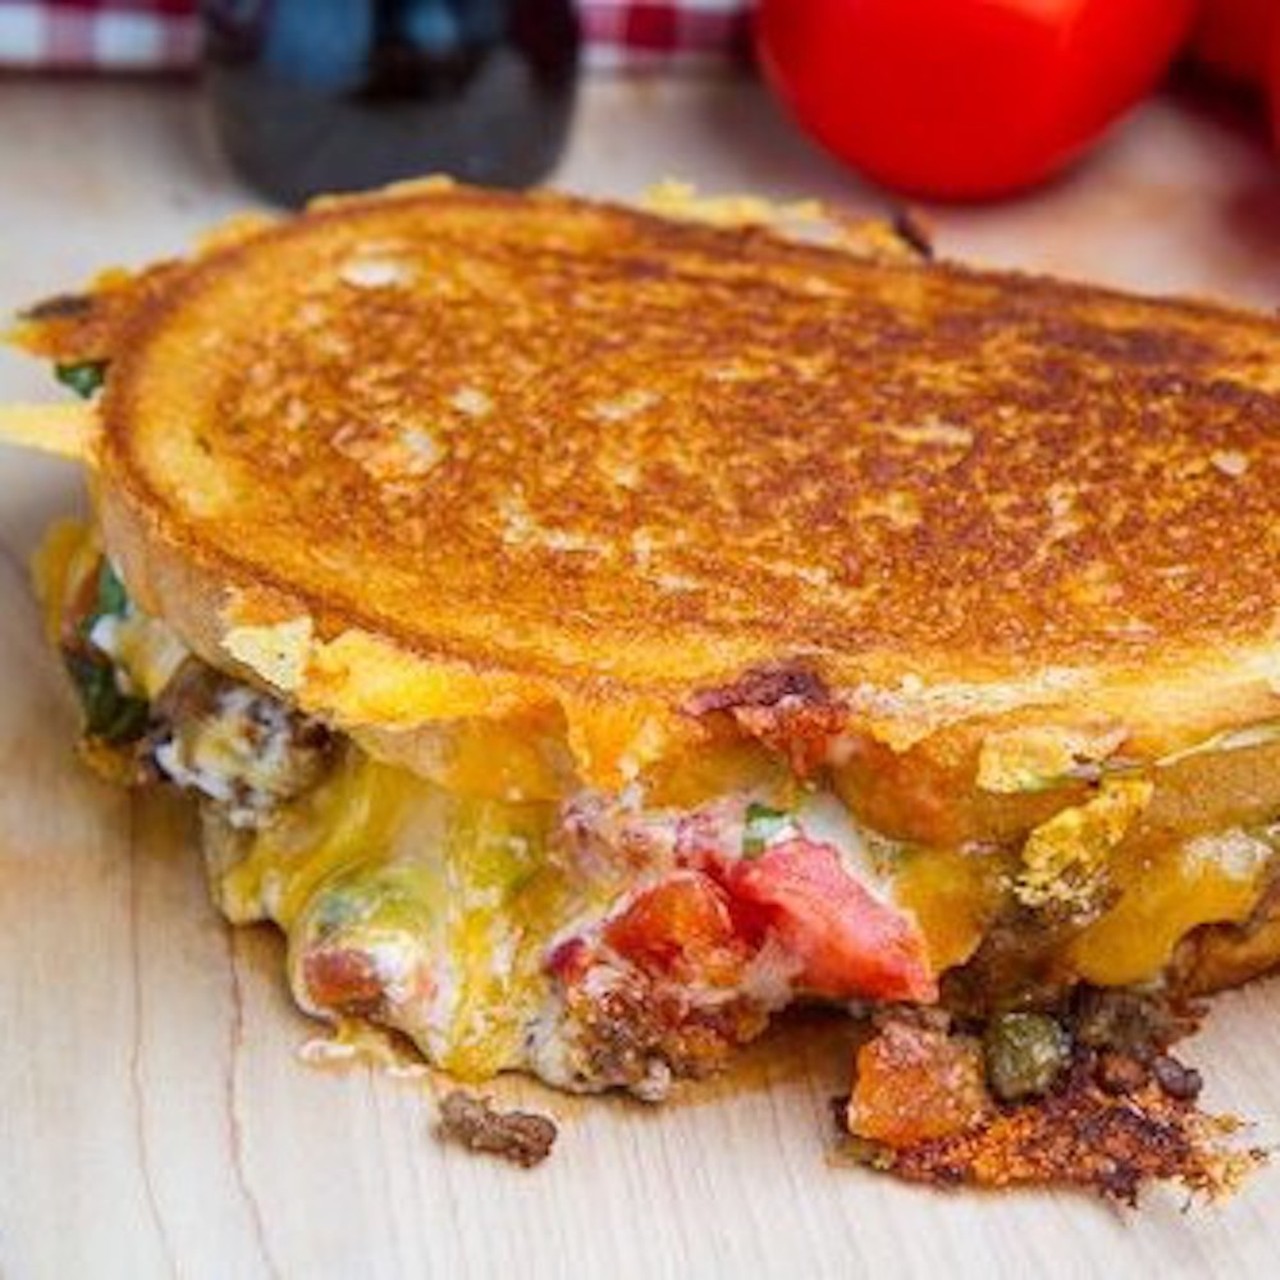 Taco Grilled Cheese
You're encouraged to dip The Giddy Piggy's sandwich mashup of Mexican-style cheese, taco meat, salsa and shredded lettuce into sour cream.